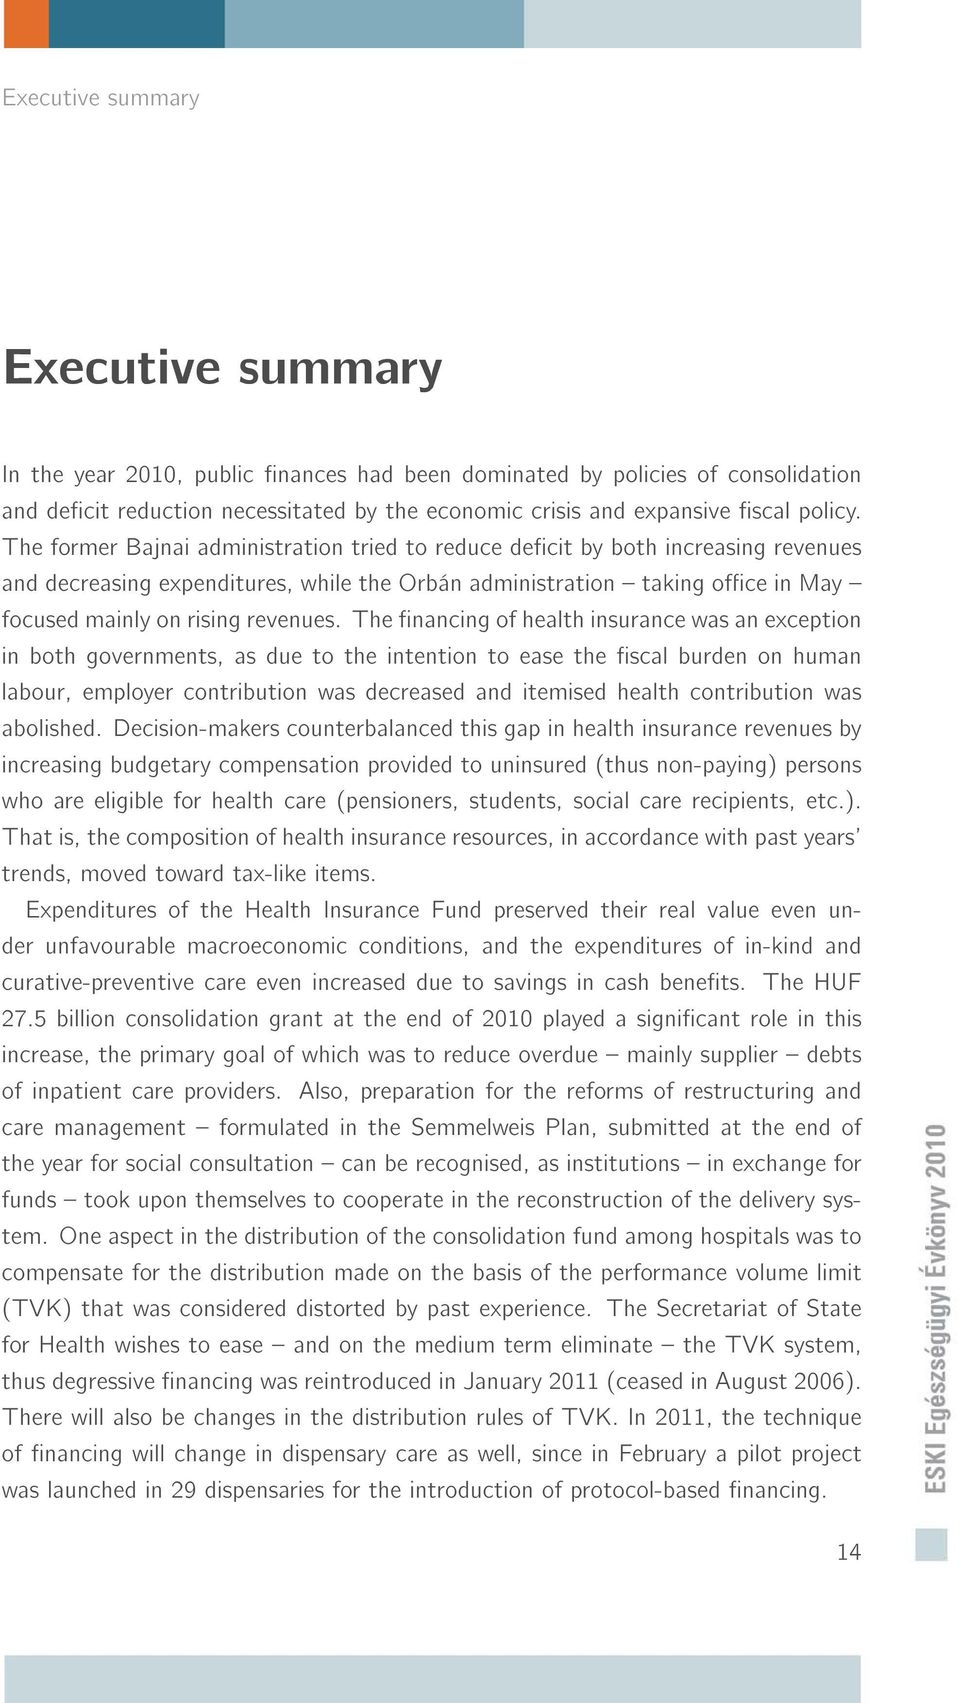 The nancing of health insurance was an exception in both governments, as due to the intention to ease the scal burden on human labour, employer contribution was decreased and itemised health